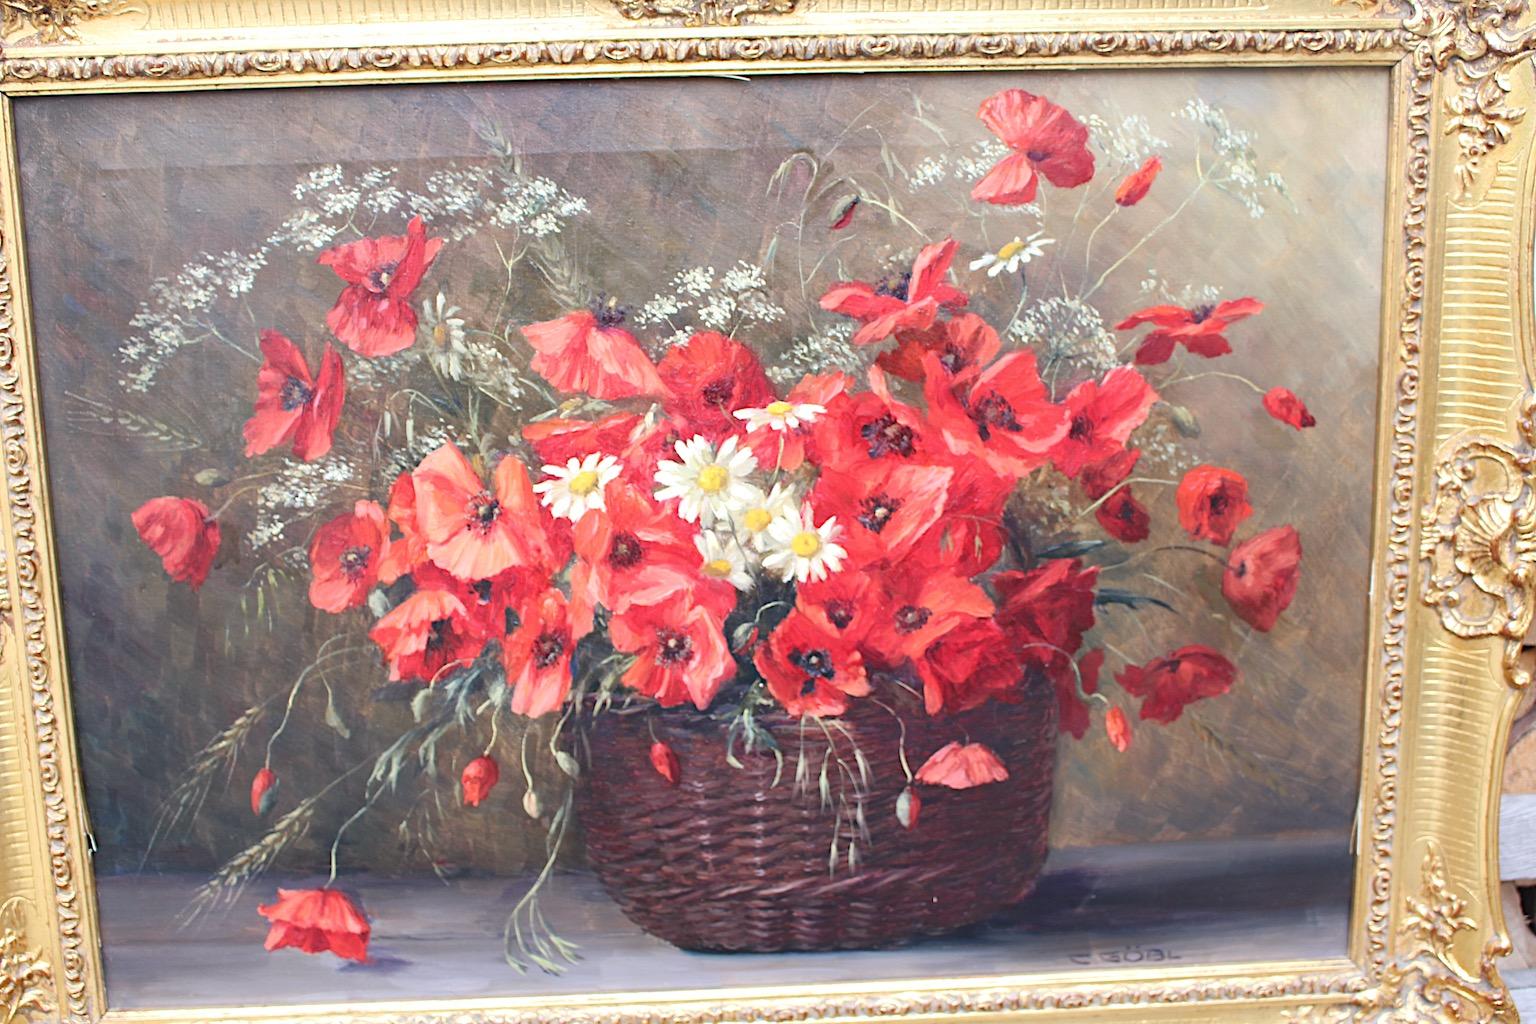 Canvas Red Poppy Flowers in a Basket Painting Golden Frame Camilla Göbl 1930s Austria For Sale